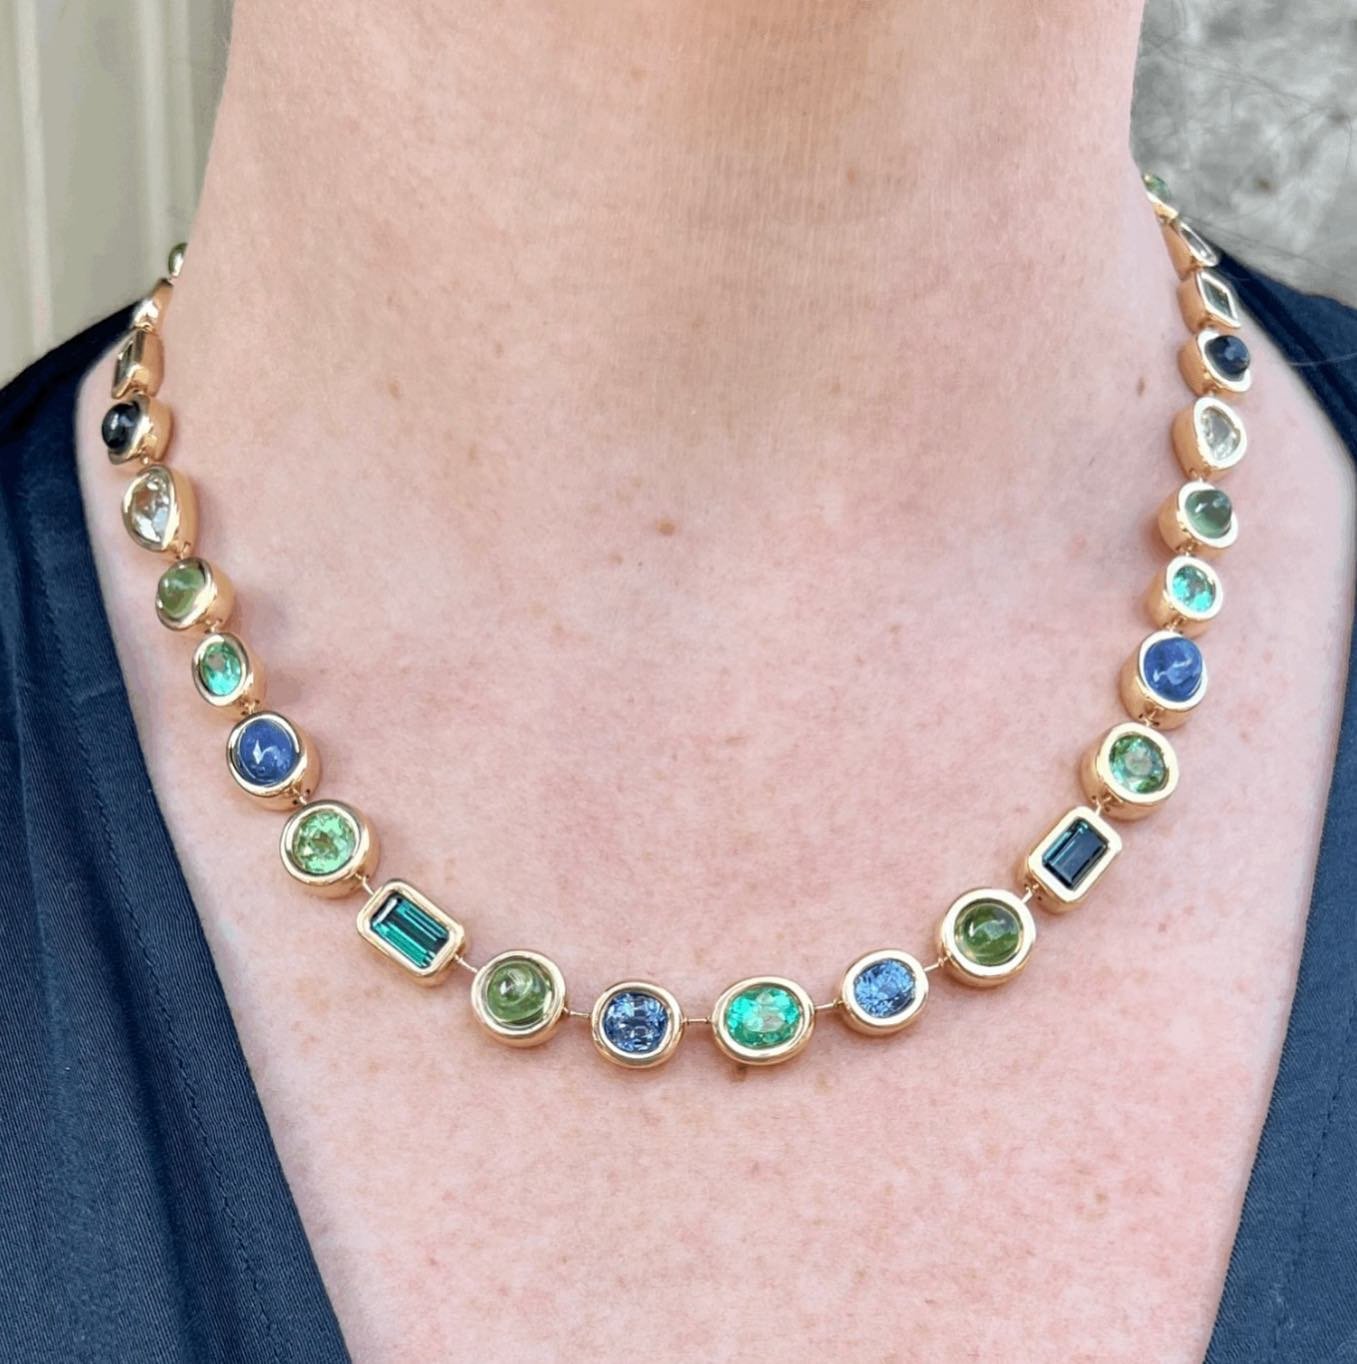 Feeling lucky 🍀 today in this @brentnealejewelry beauty! The one-of-a-kind cabochon pillow necklace is available @shopetcaspen this week at our designer event with Brent in-store this Tuesday and Wednesday! Follow along this week for details to shop